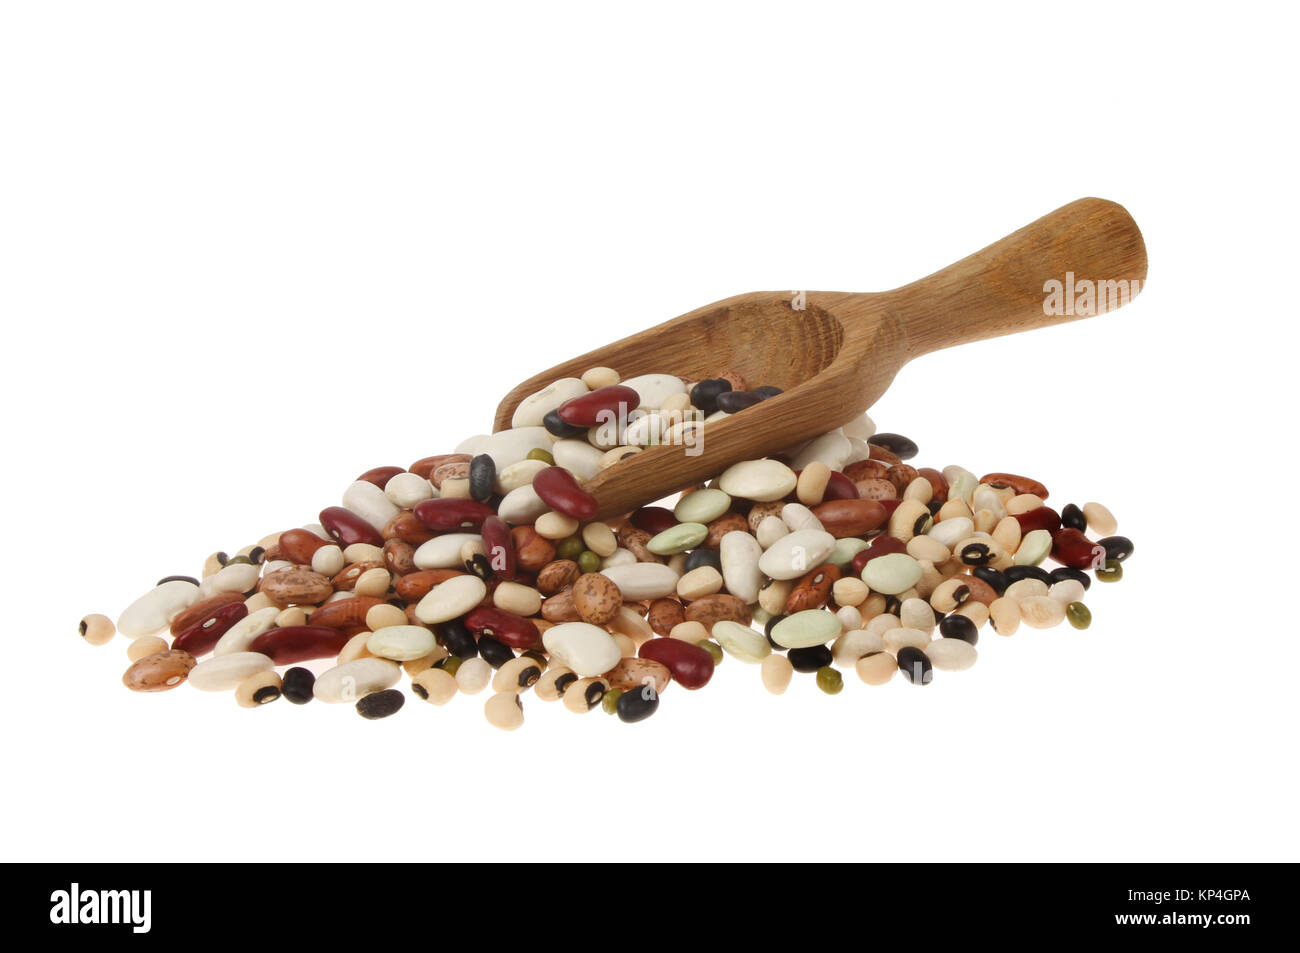 Pile of ten dried beans with a wooden scoop isolated against white Stock Photo